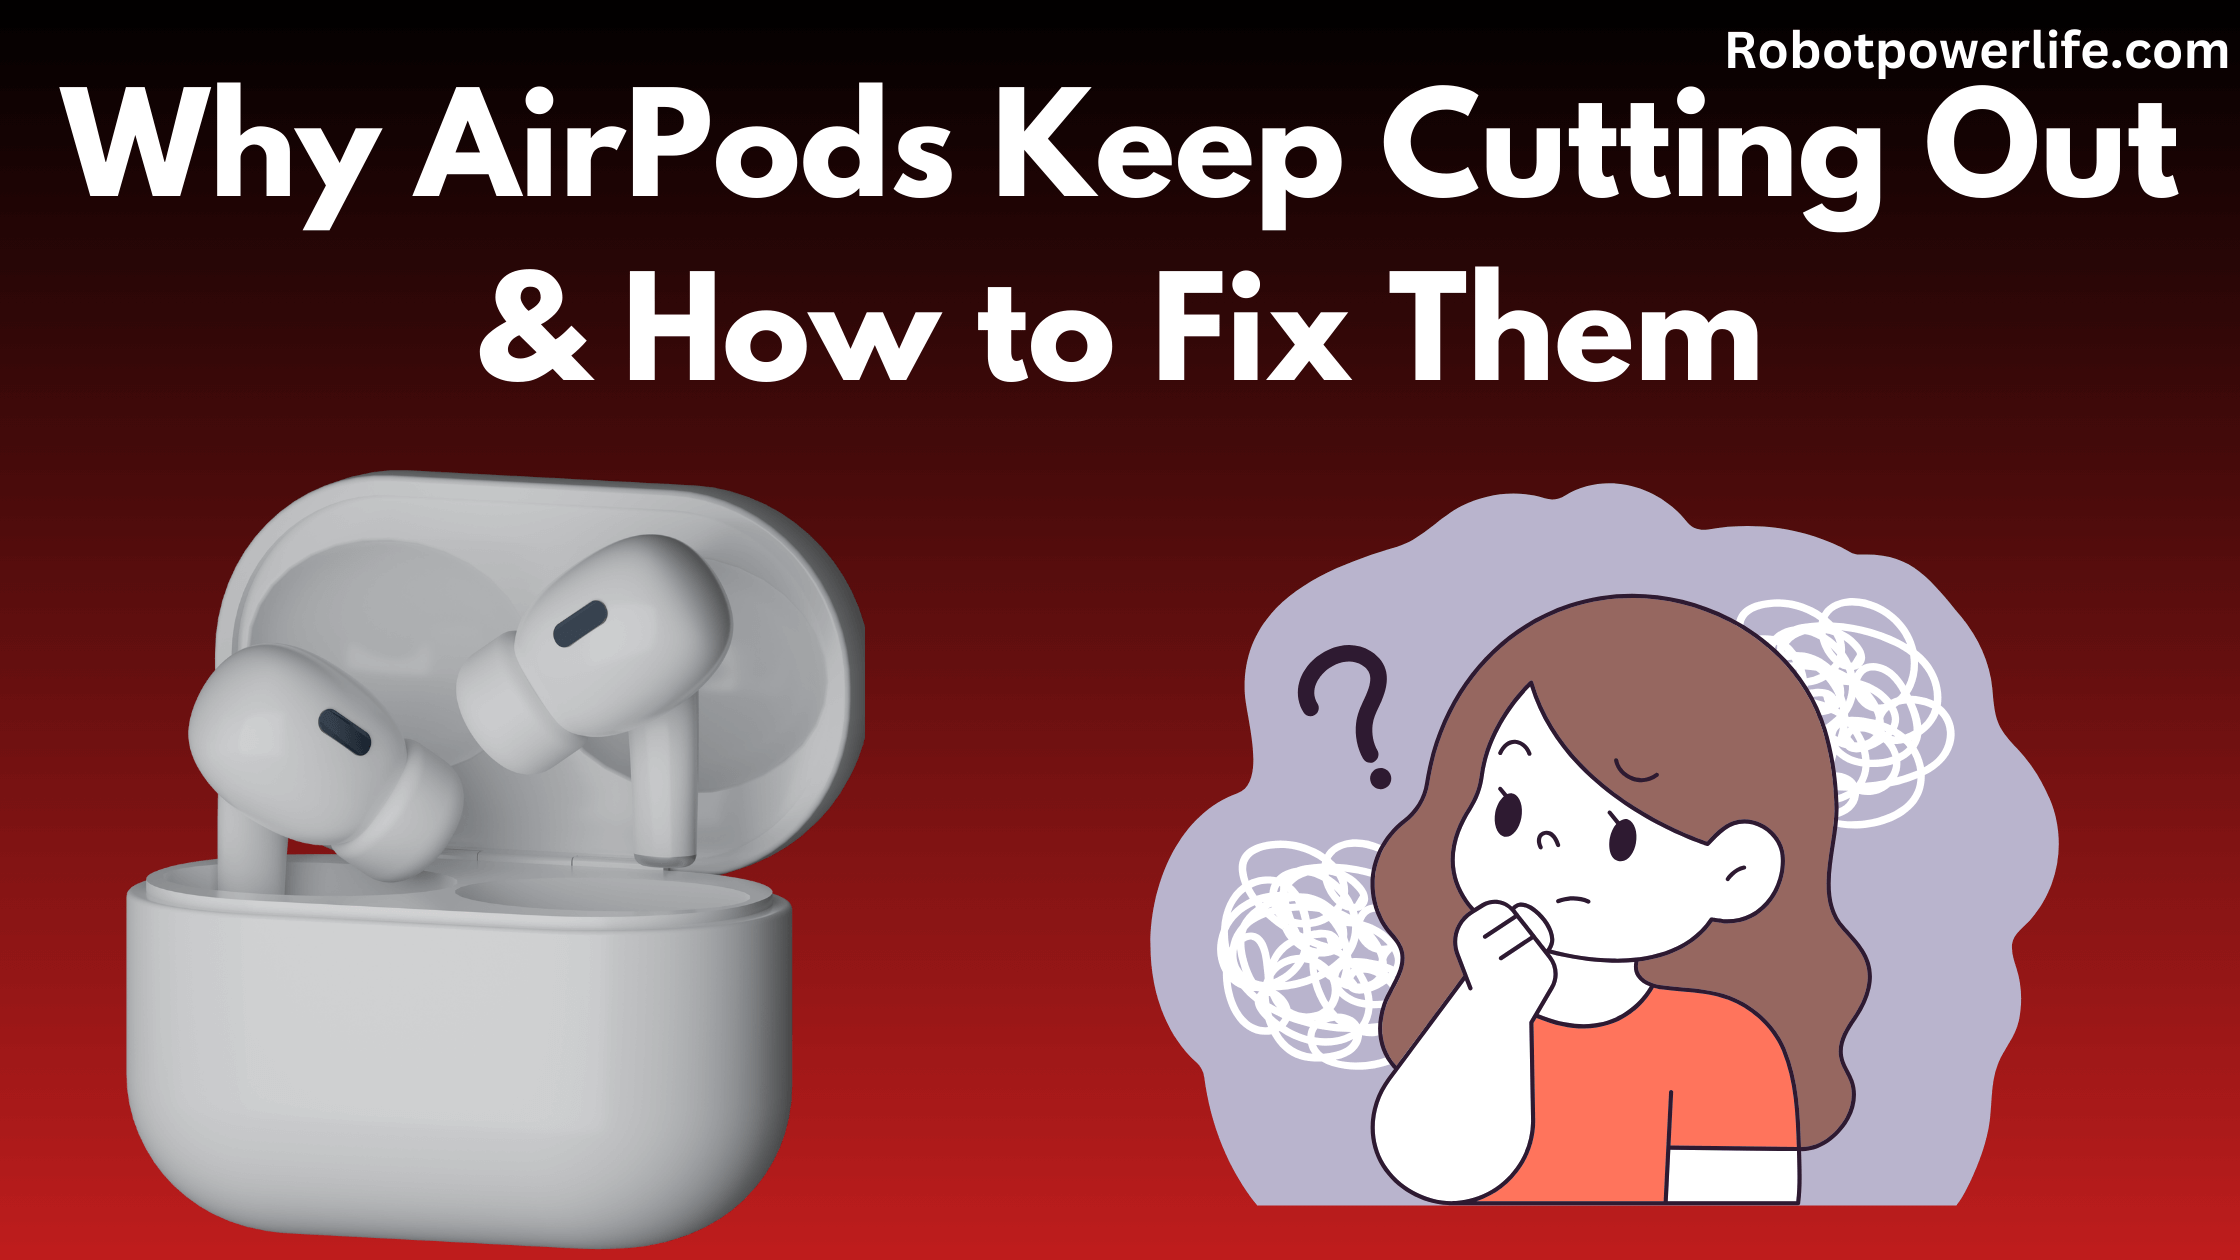 Why AirPods Keep Cutting Out & How to Fix Them